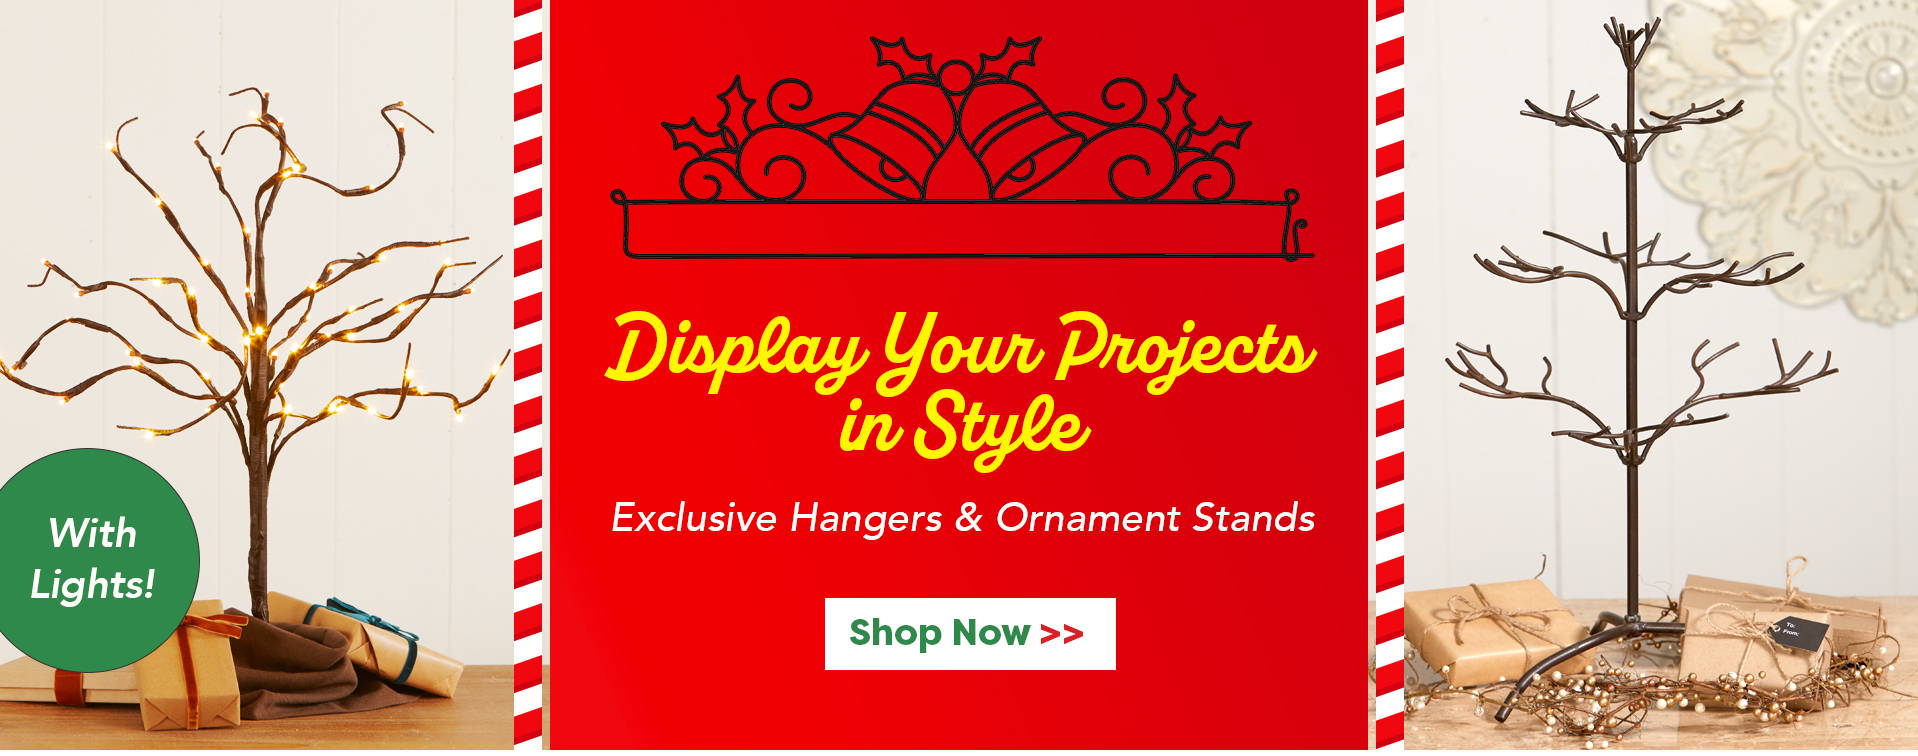 Display your projects in style with Exclusive Christmas hangers and ornament stands. 